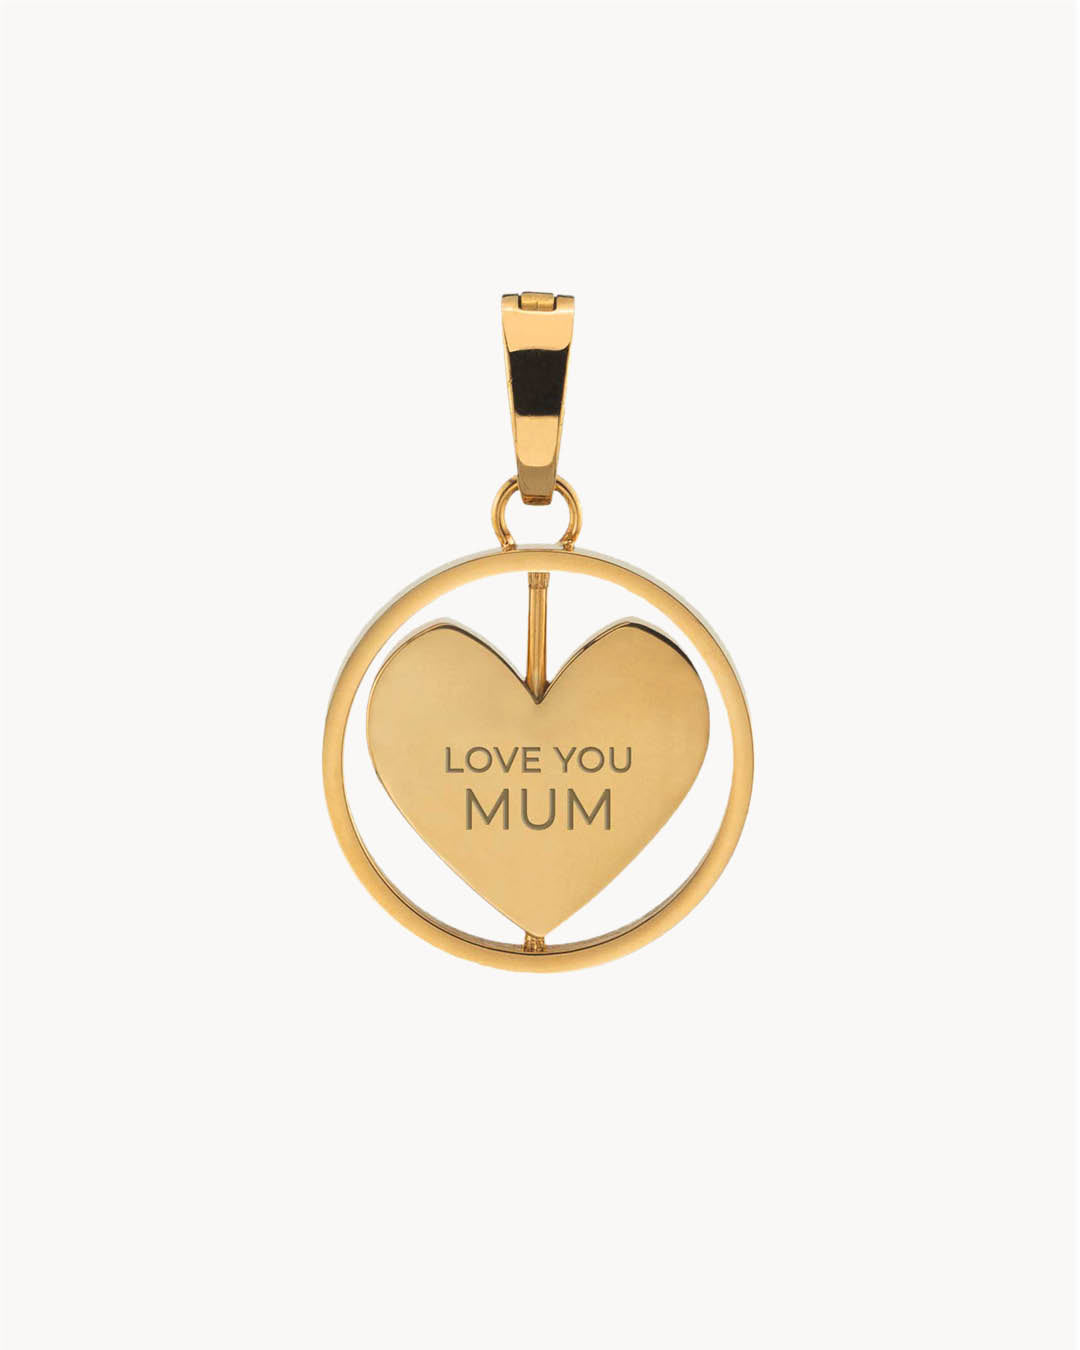 Buy Names on Heart Disc & Rings Family Pendant, 9ct Gold Plated on 925  Silver Gift for Mum, Necklace Chain Options Online in India - Etsy